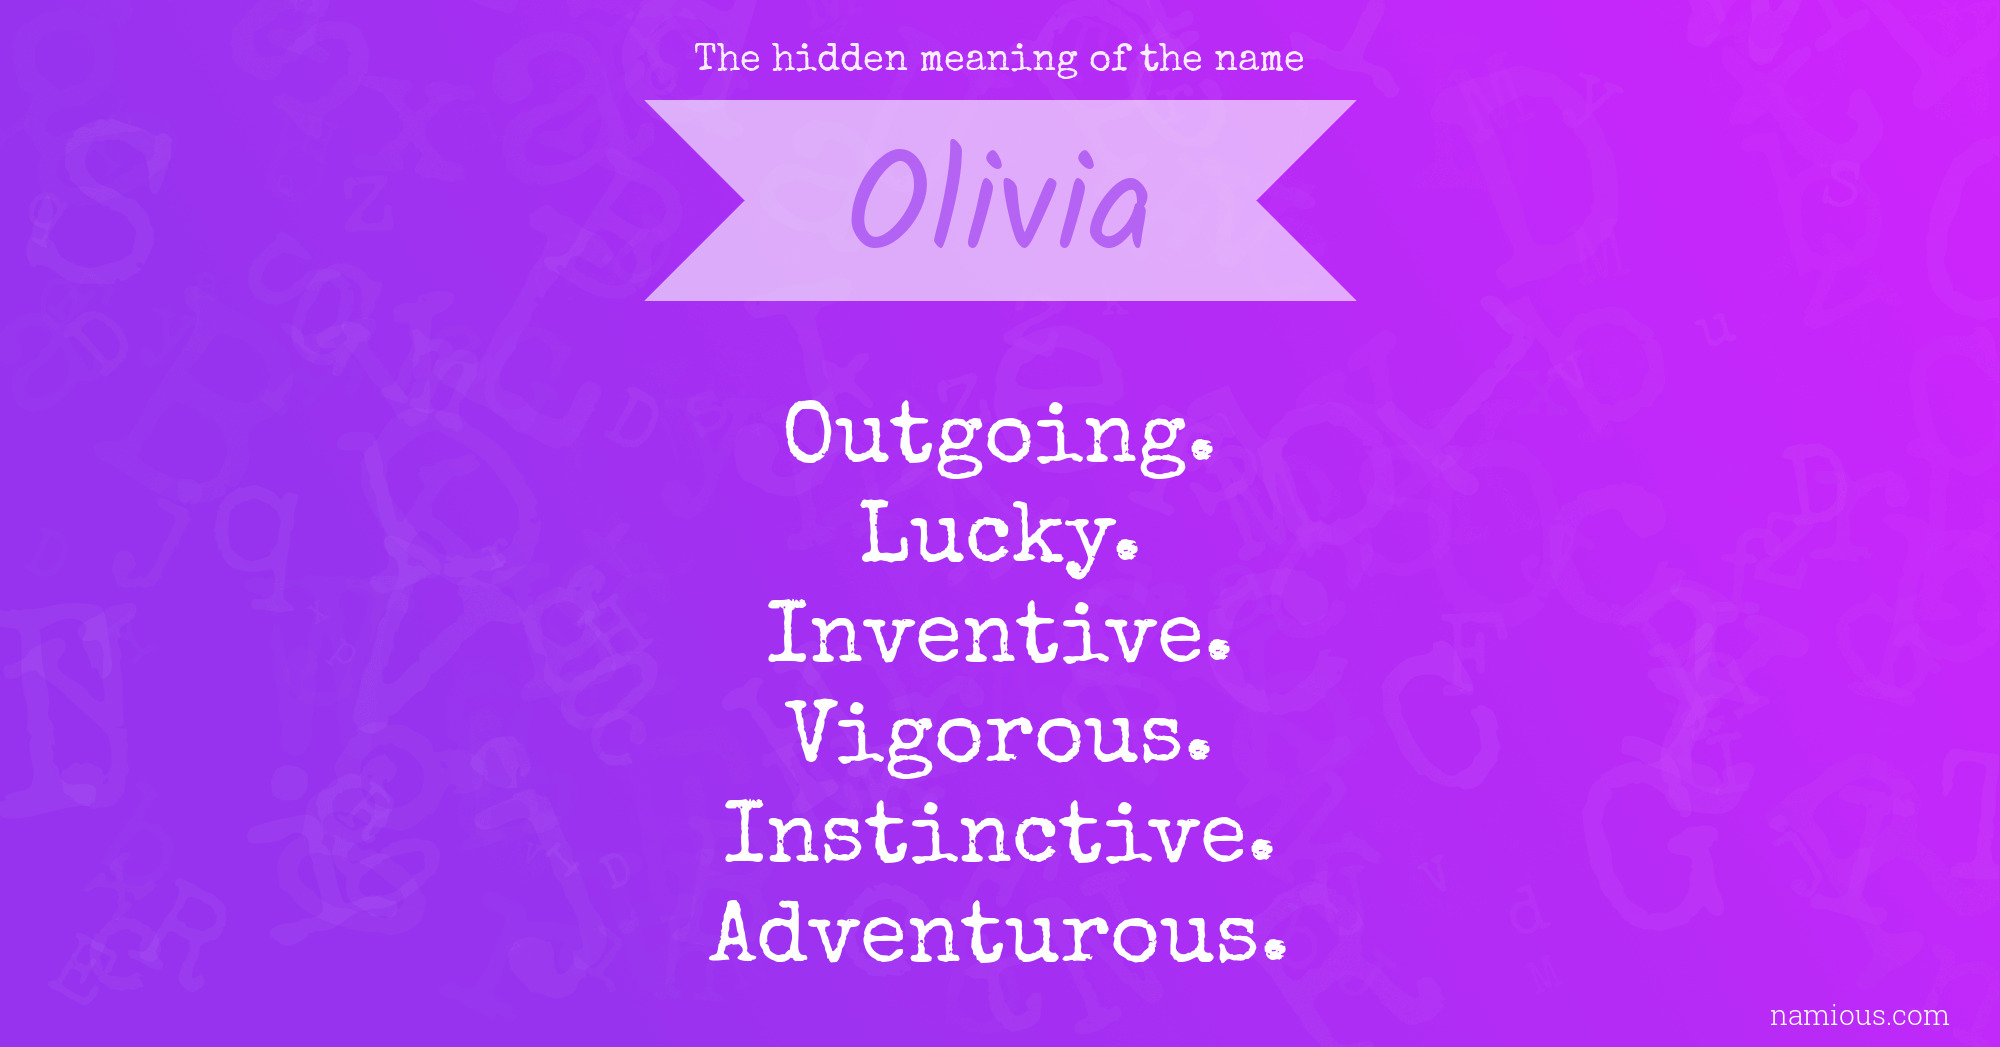 The hidden meaning of the name Olivia